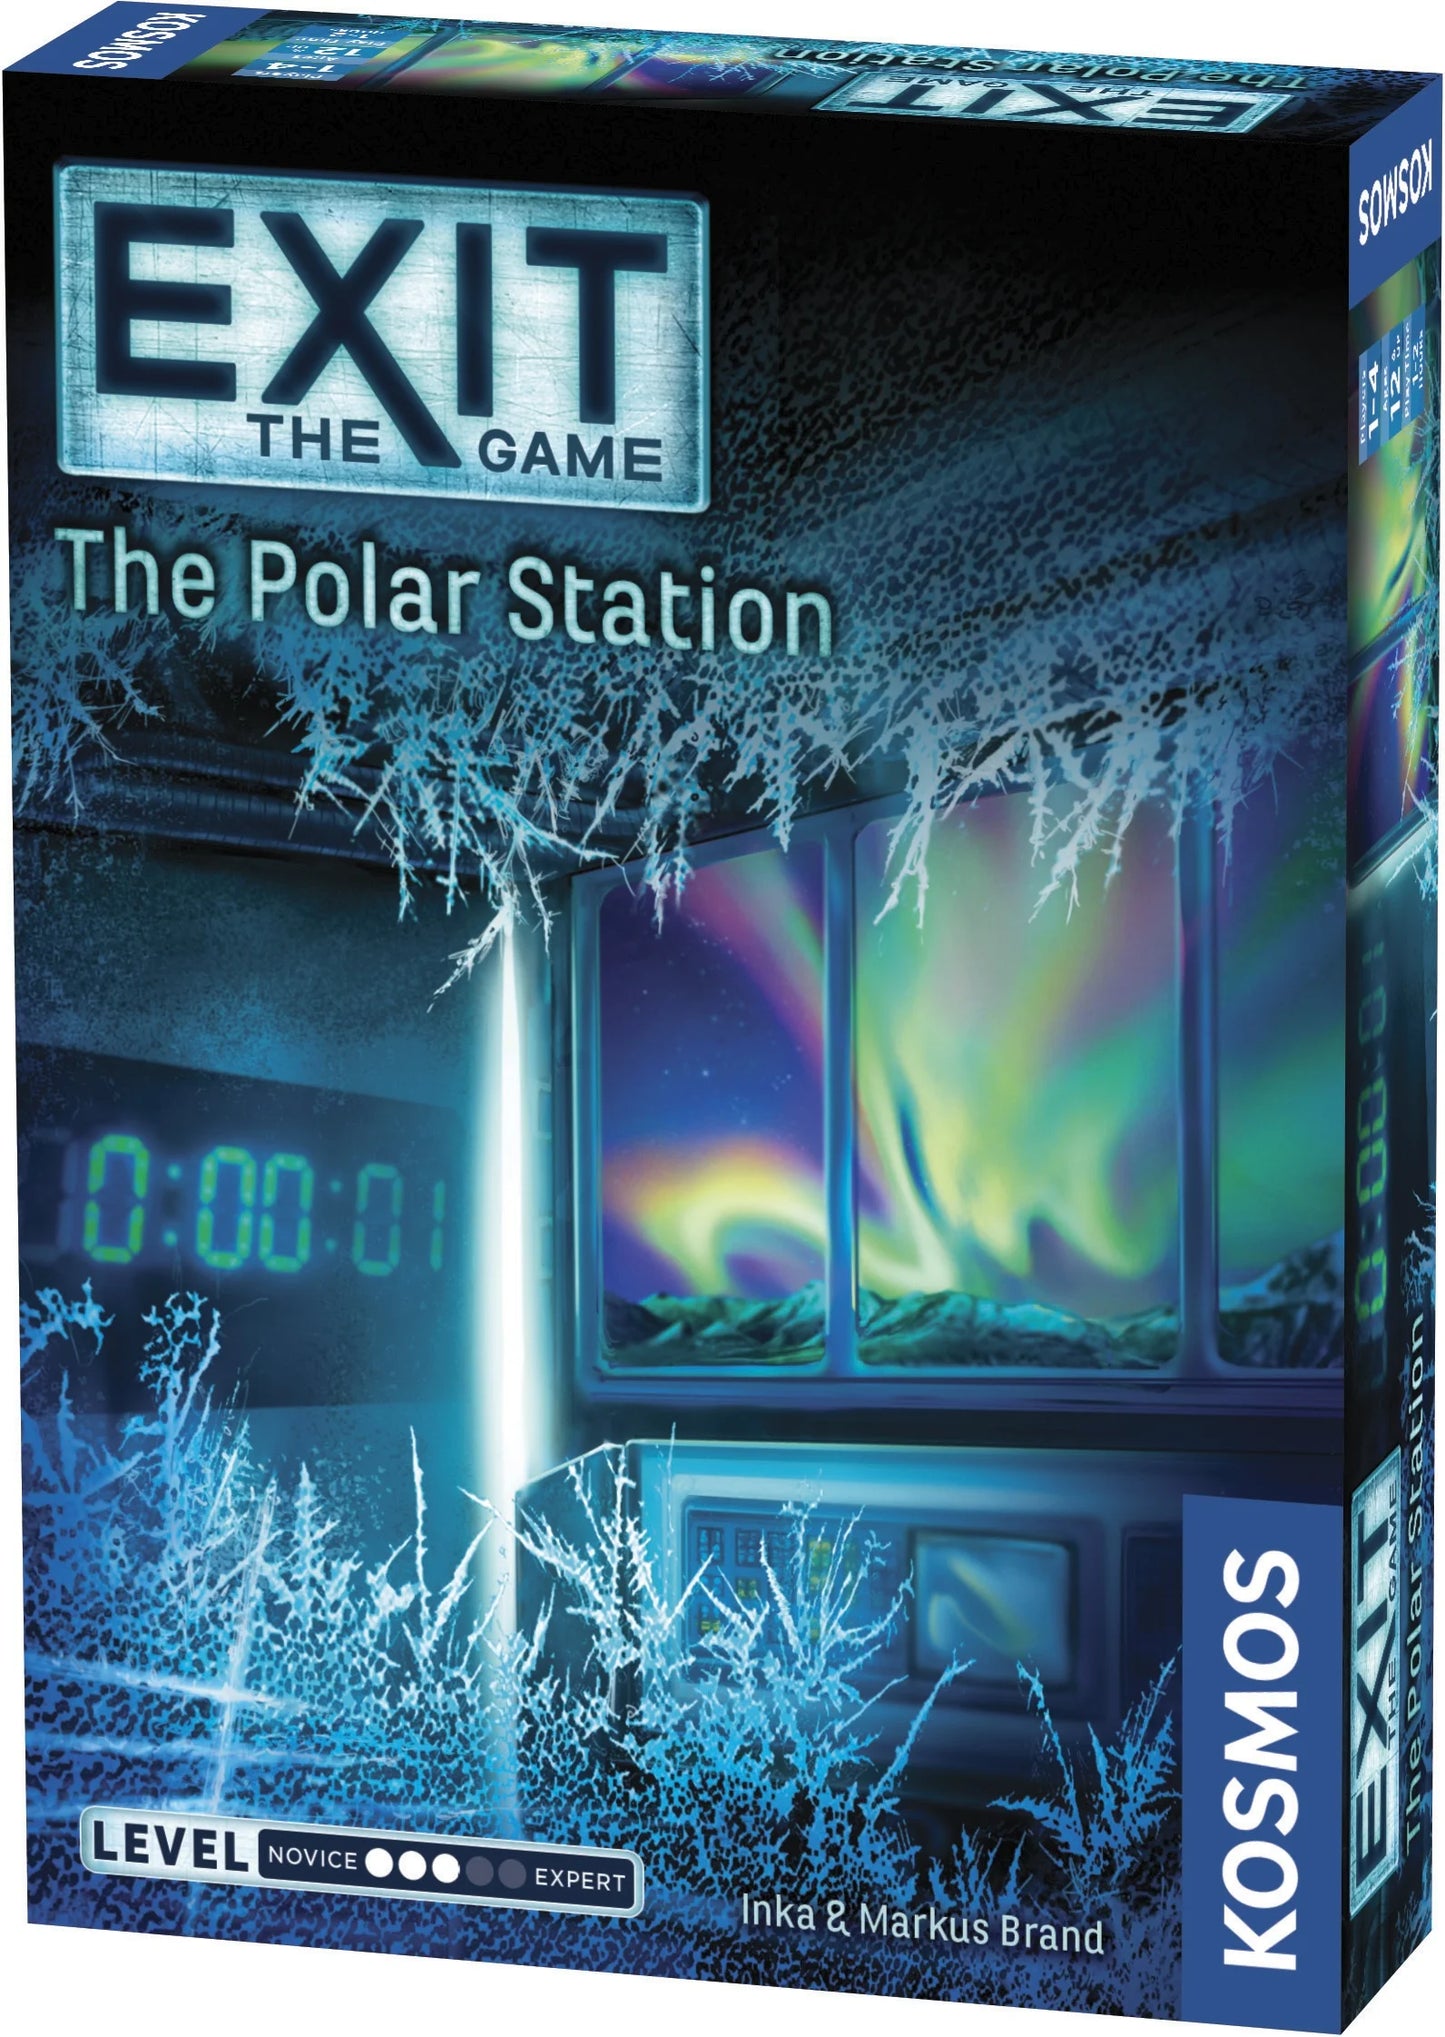 Exit the Game The Polar Station (7713930019015)